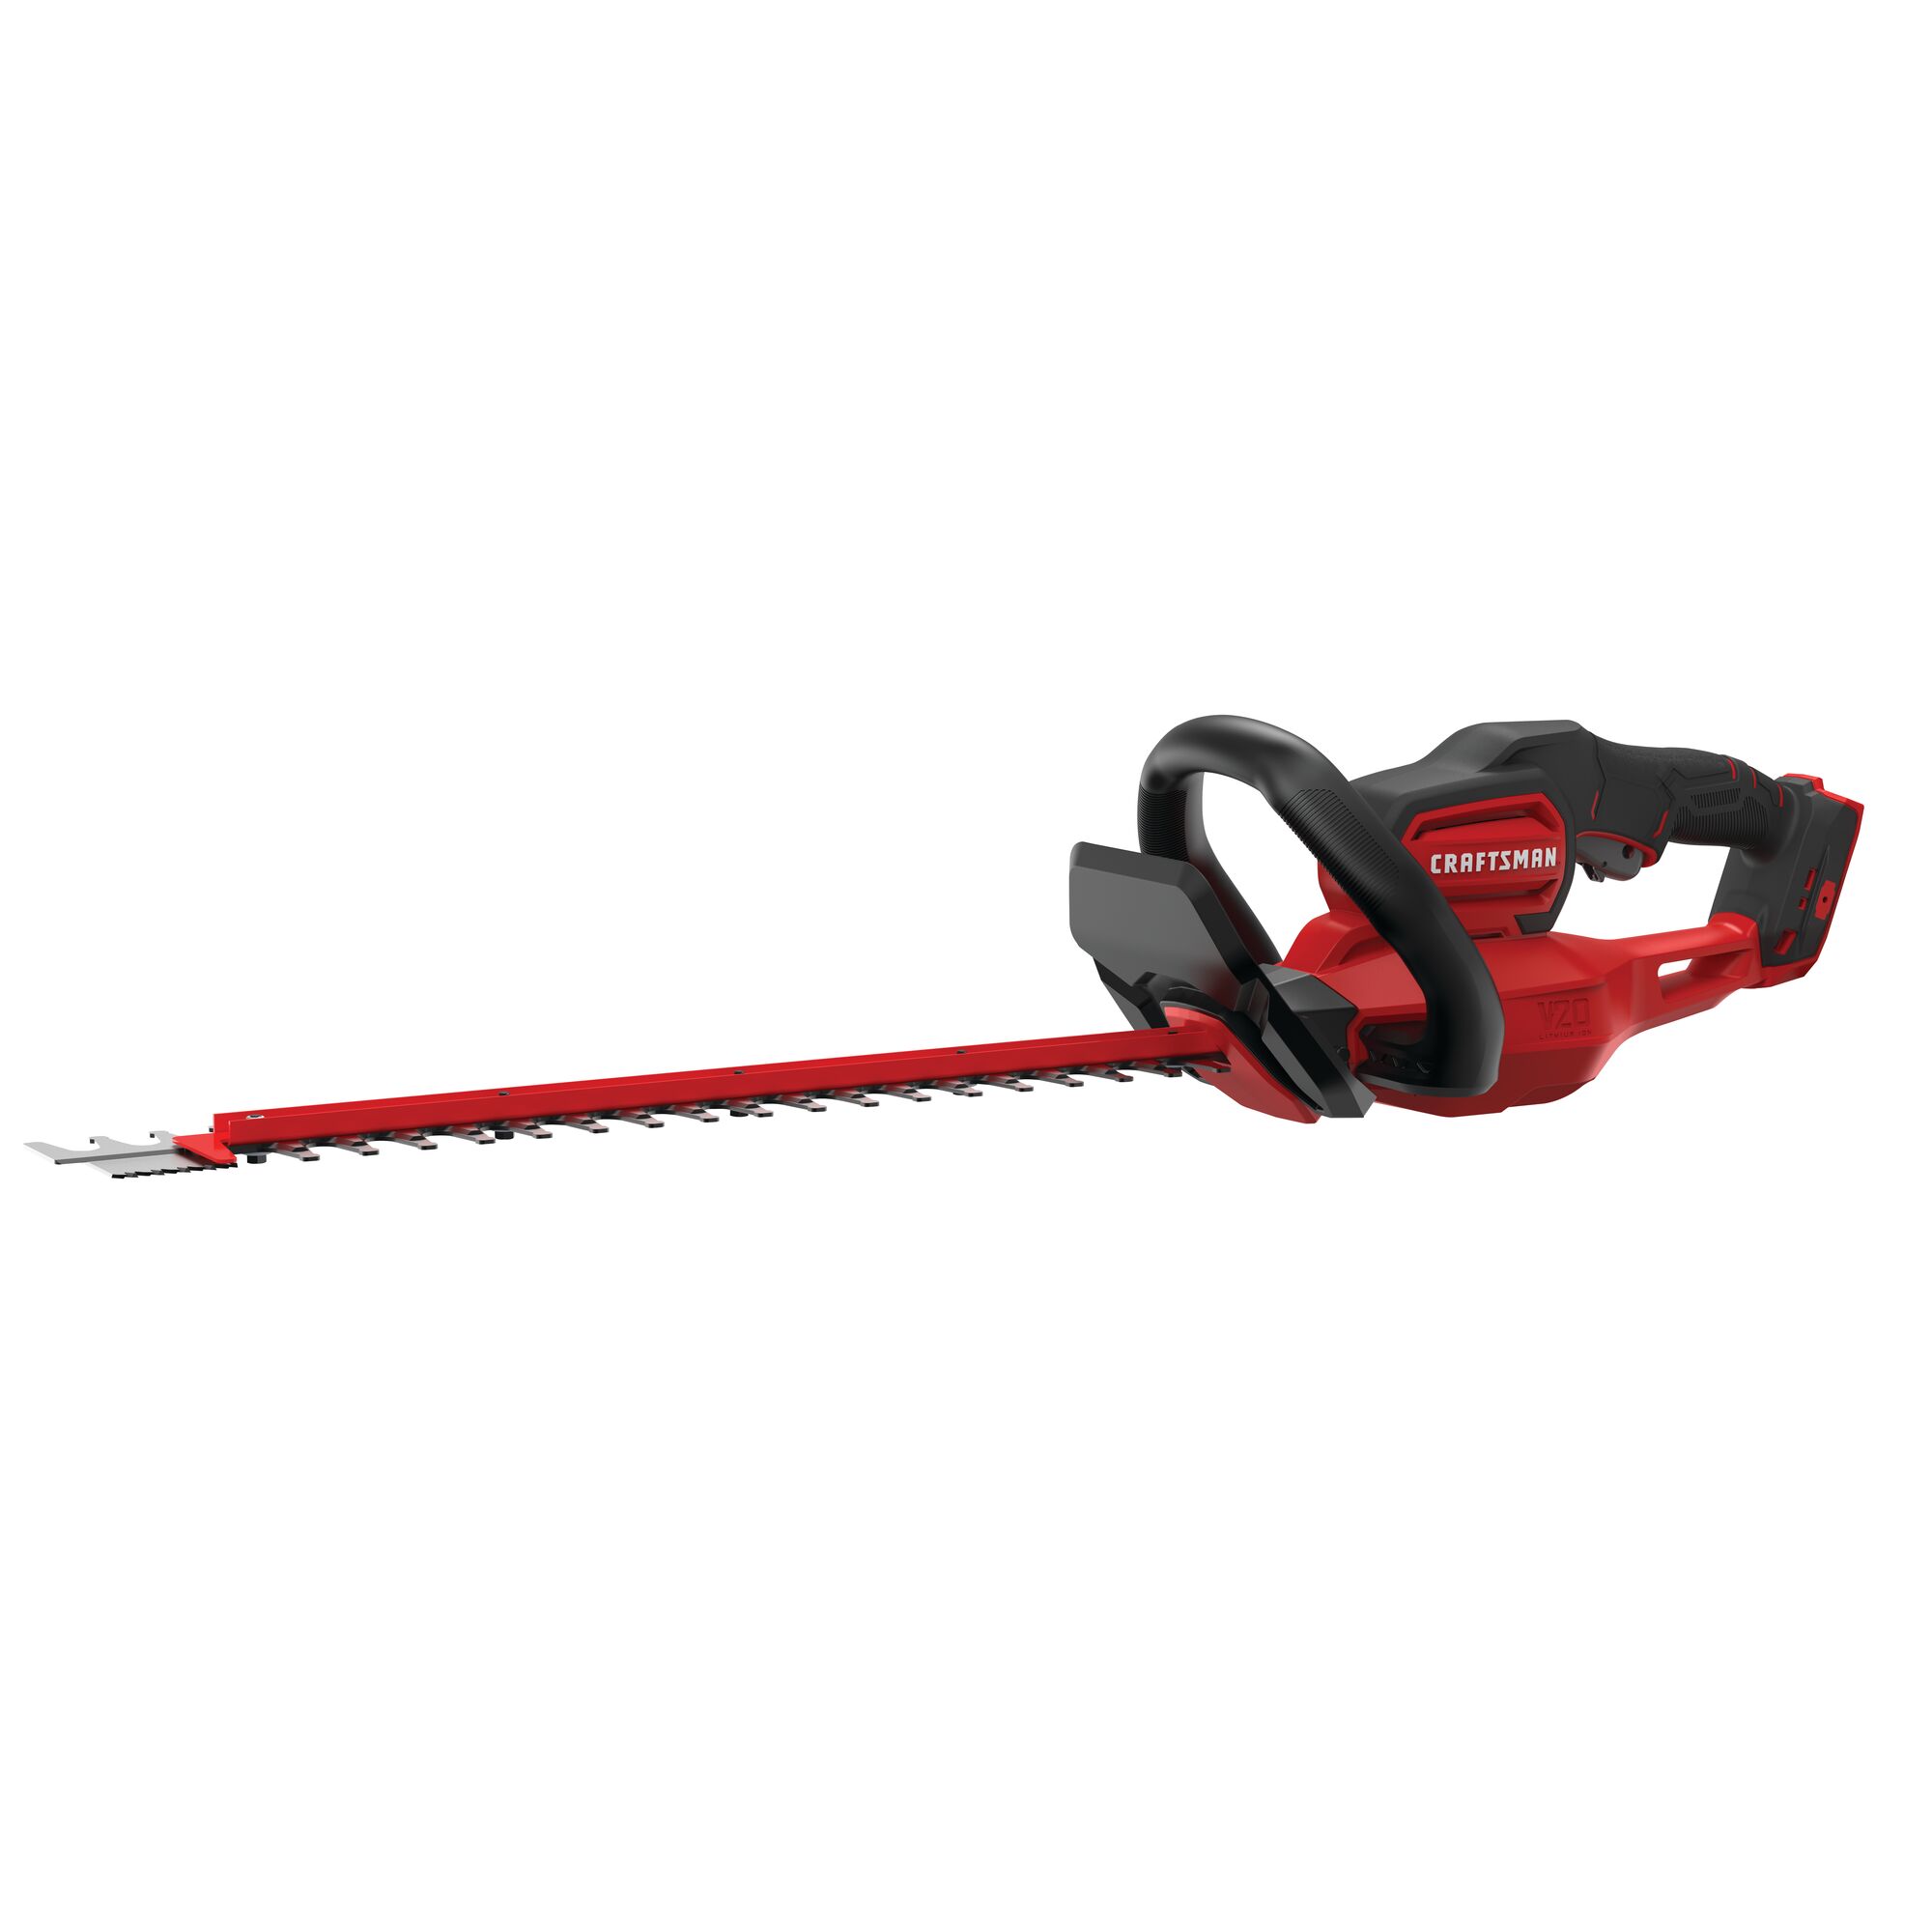 Cordless 22 inch hedge trimmer.